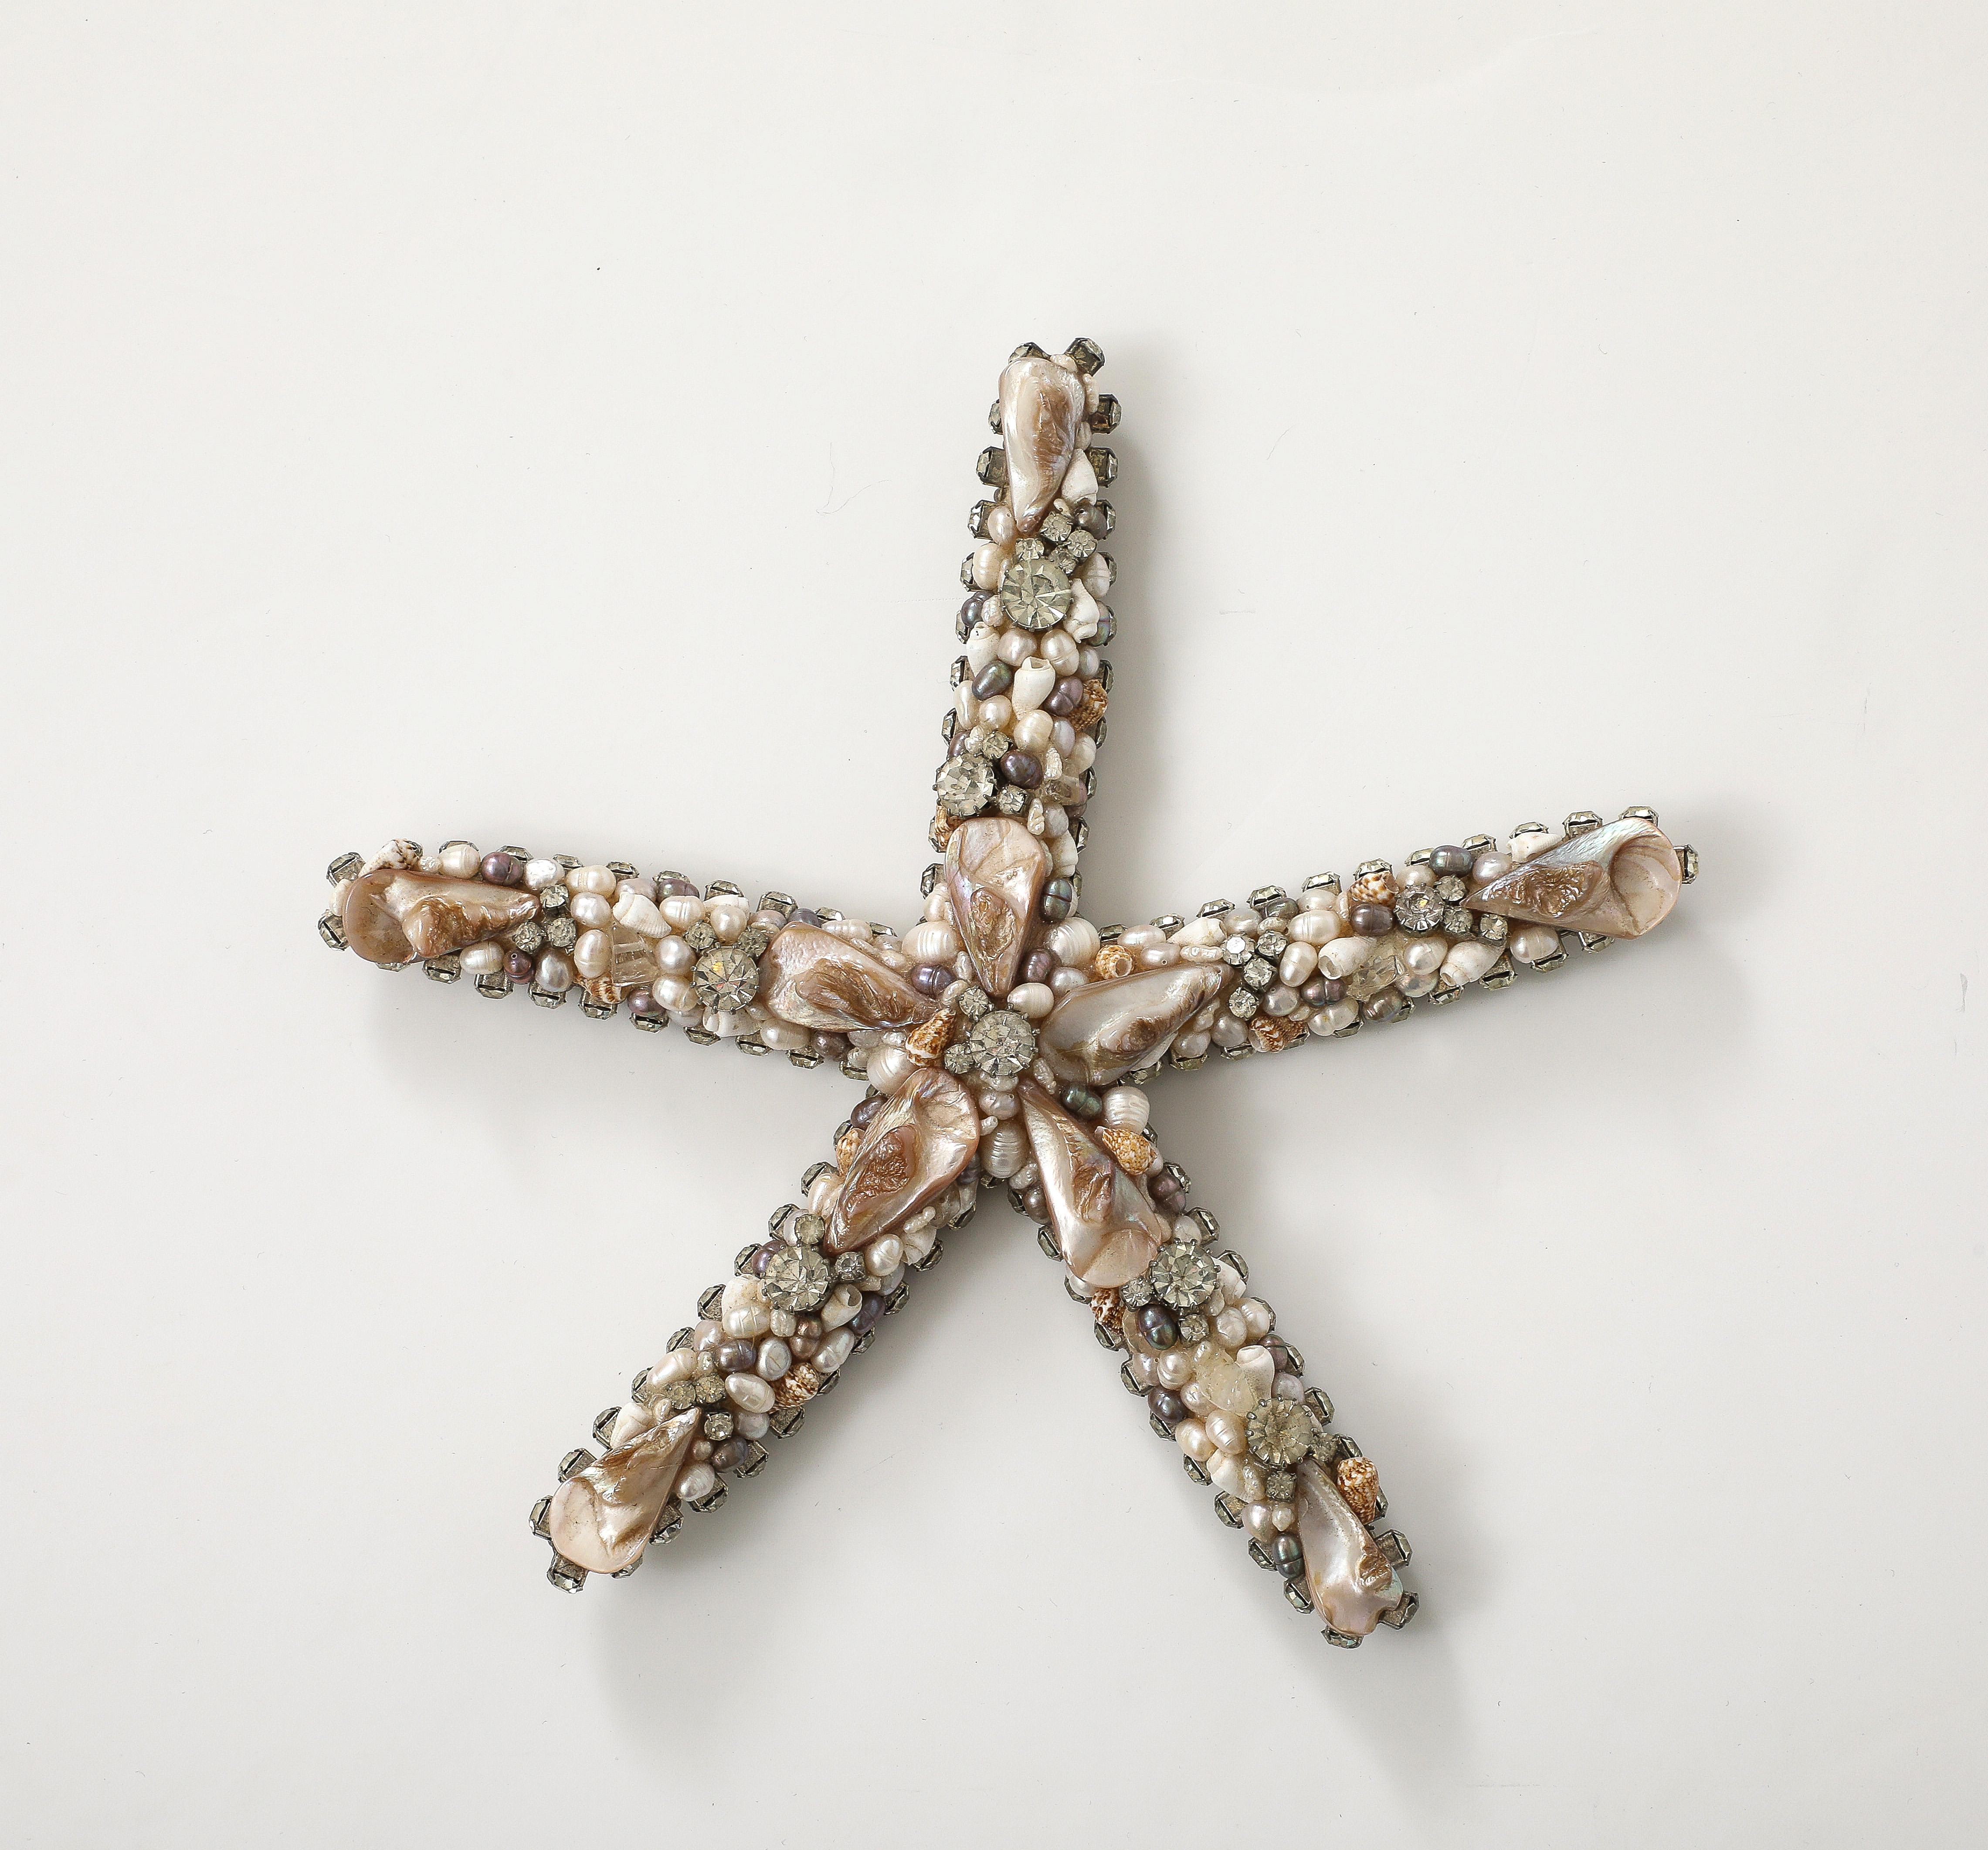 Large Starfish encrusted with Swarovski crystals and 
miniature shells by Artist  Douglas Cloutier
The piece is signed on the back with the Cloutier label.